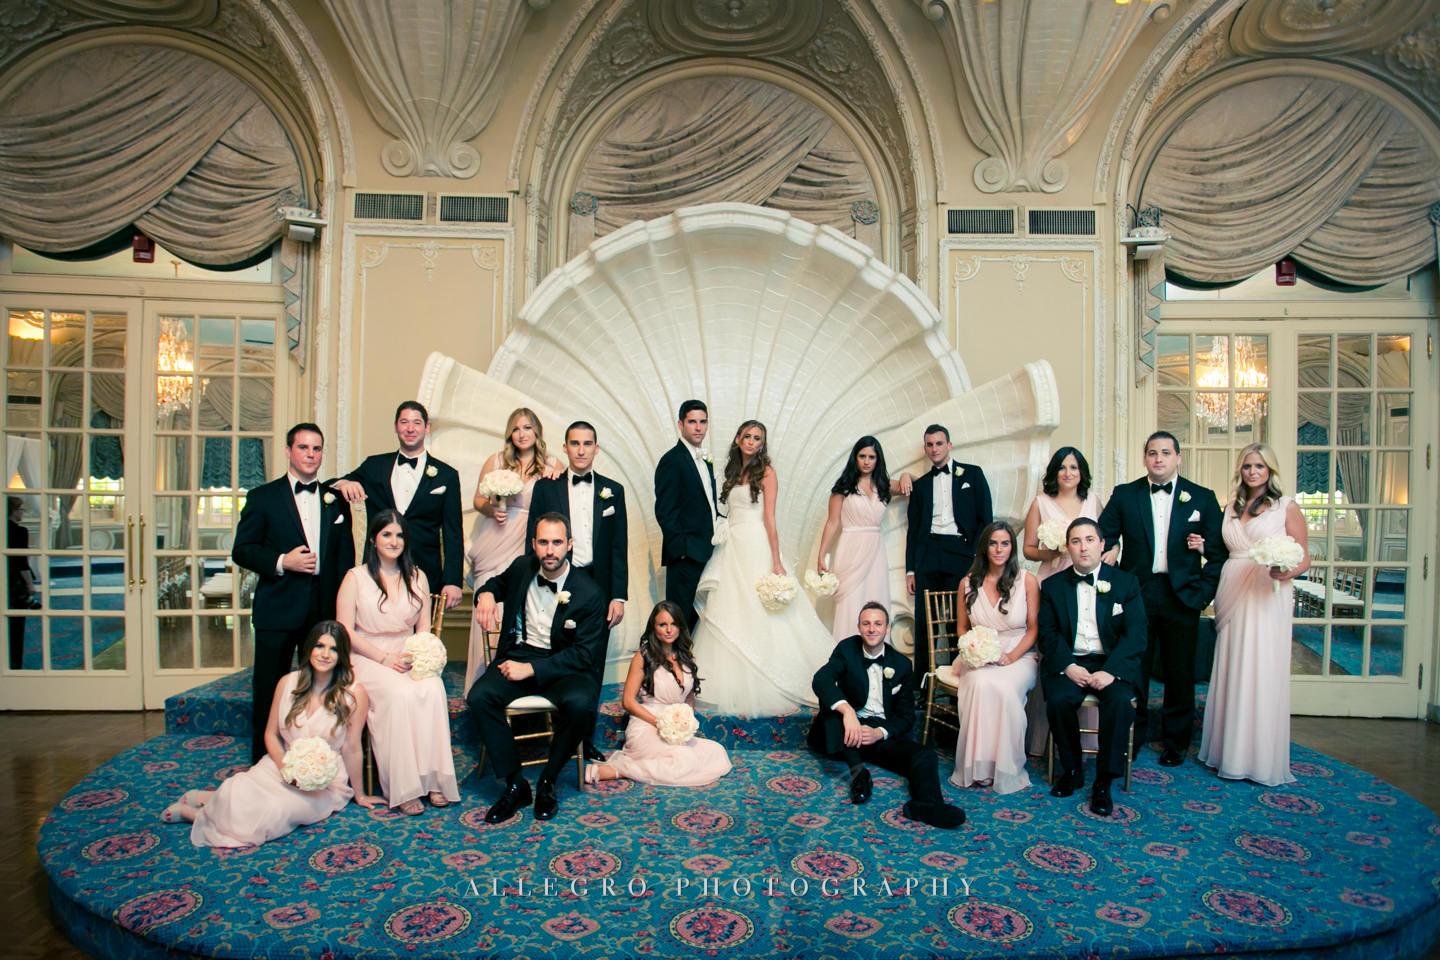 vanity fair-vogue wedding party portrait fairmont copley plaza band shell - photo by Allegro Photography